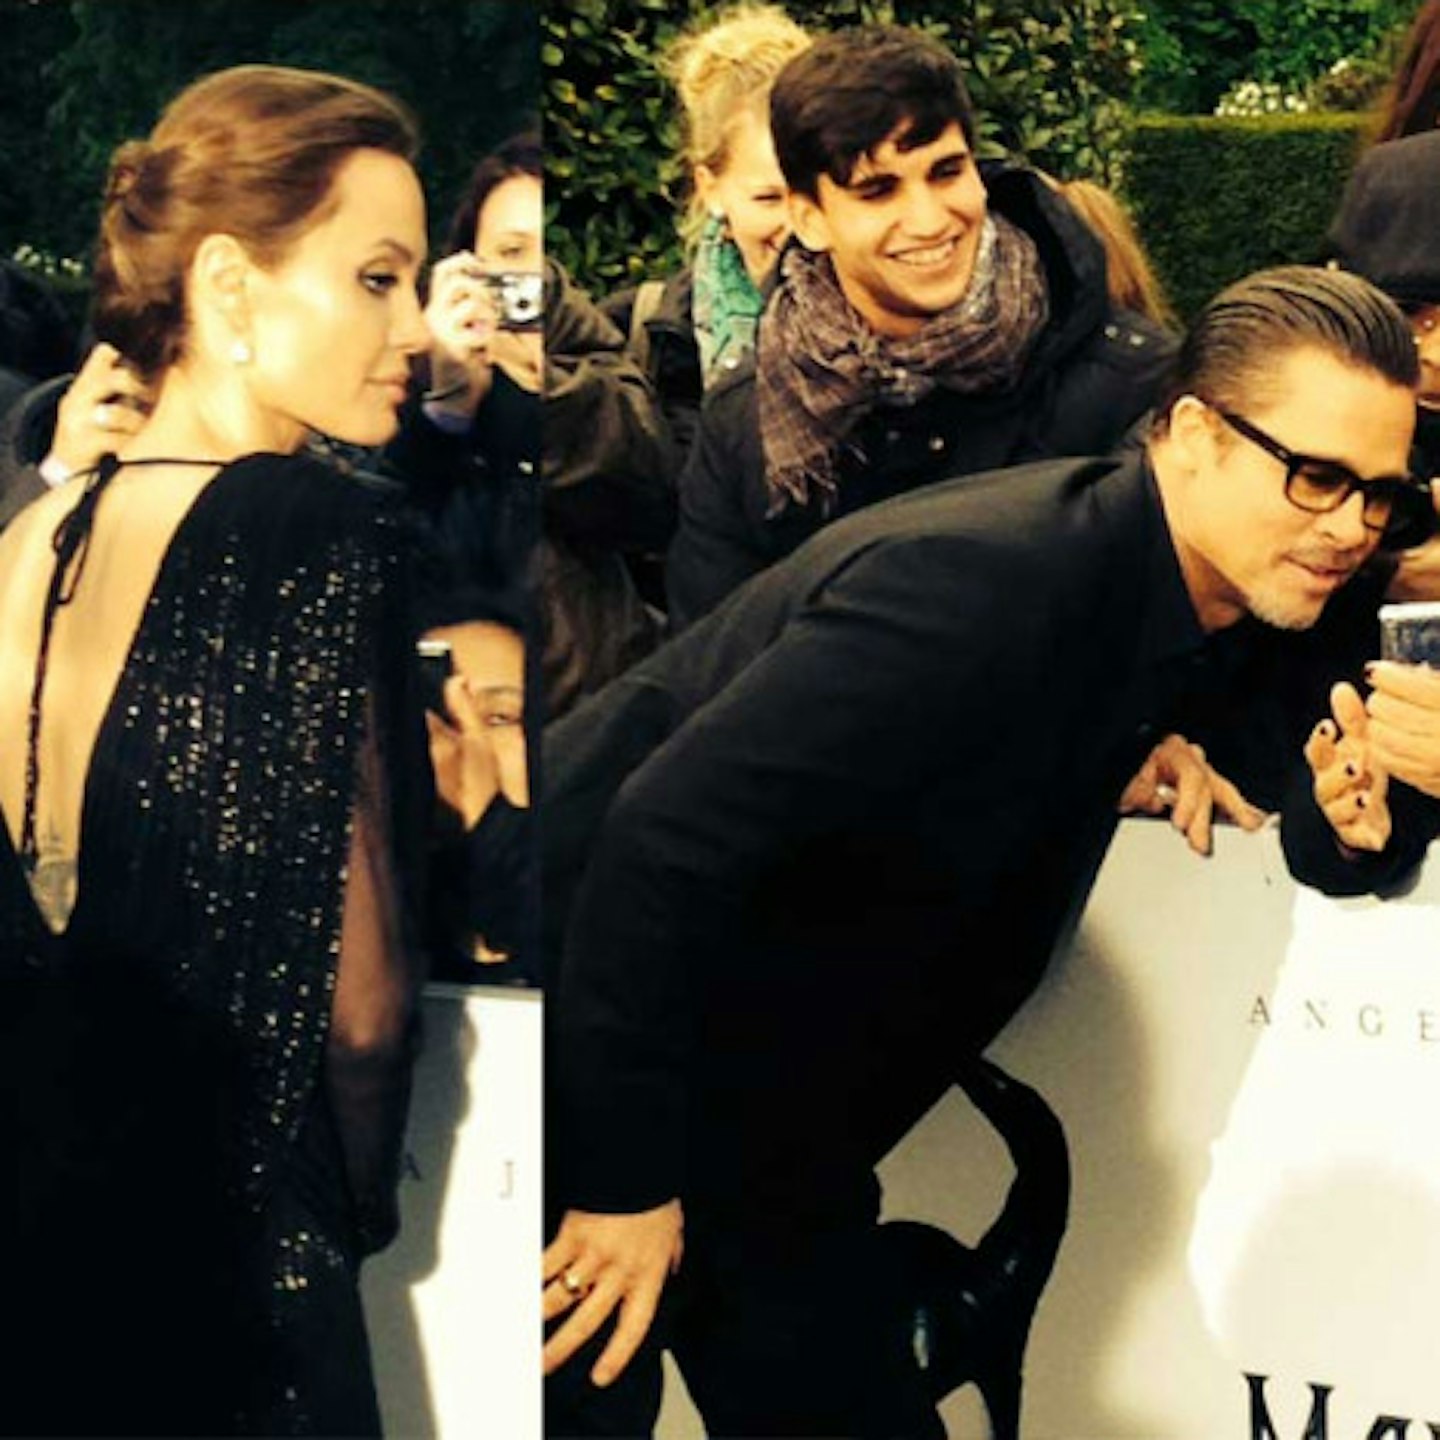 Brad supported wife Angelina by turning up to the premiere last night